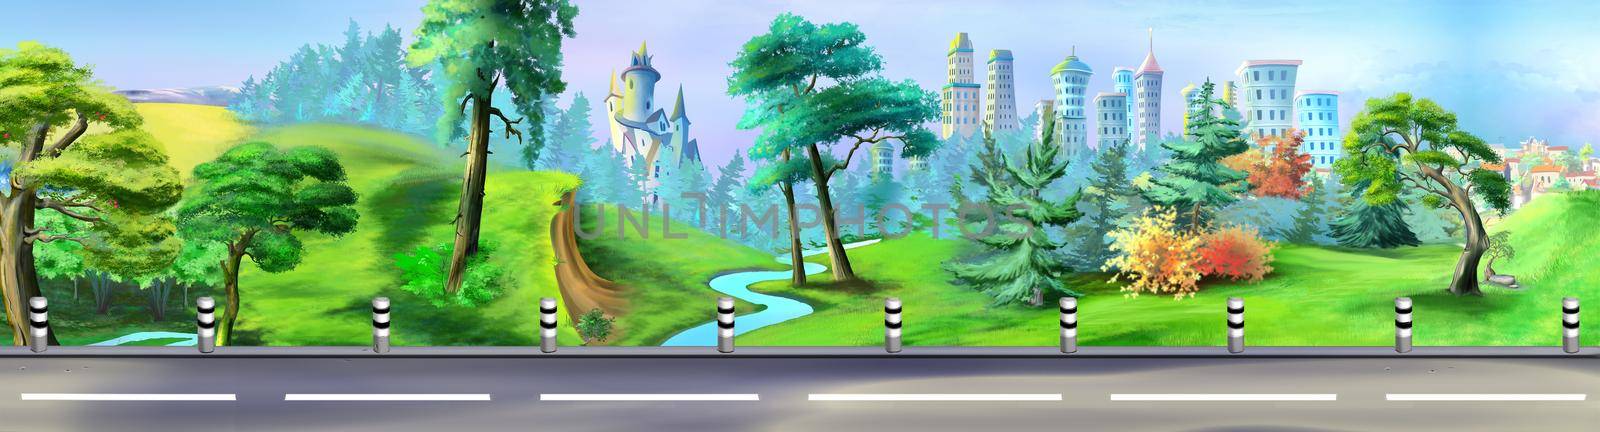 Suburban highway past the park on a sunny day. Digital Painting Background, Illustration.